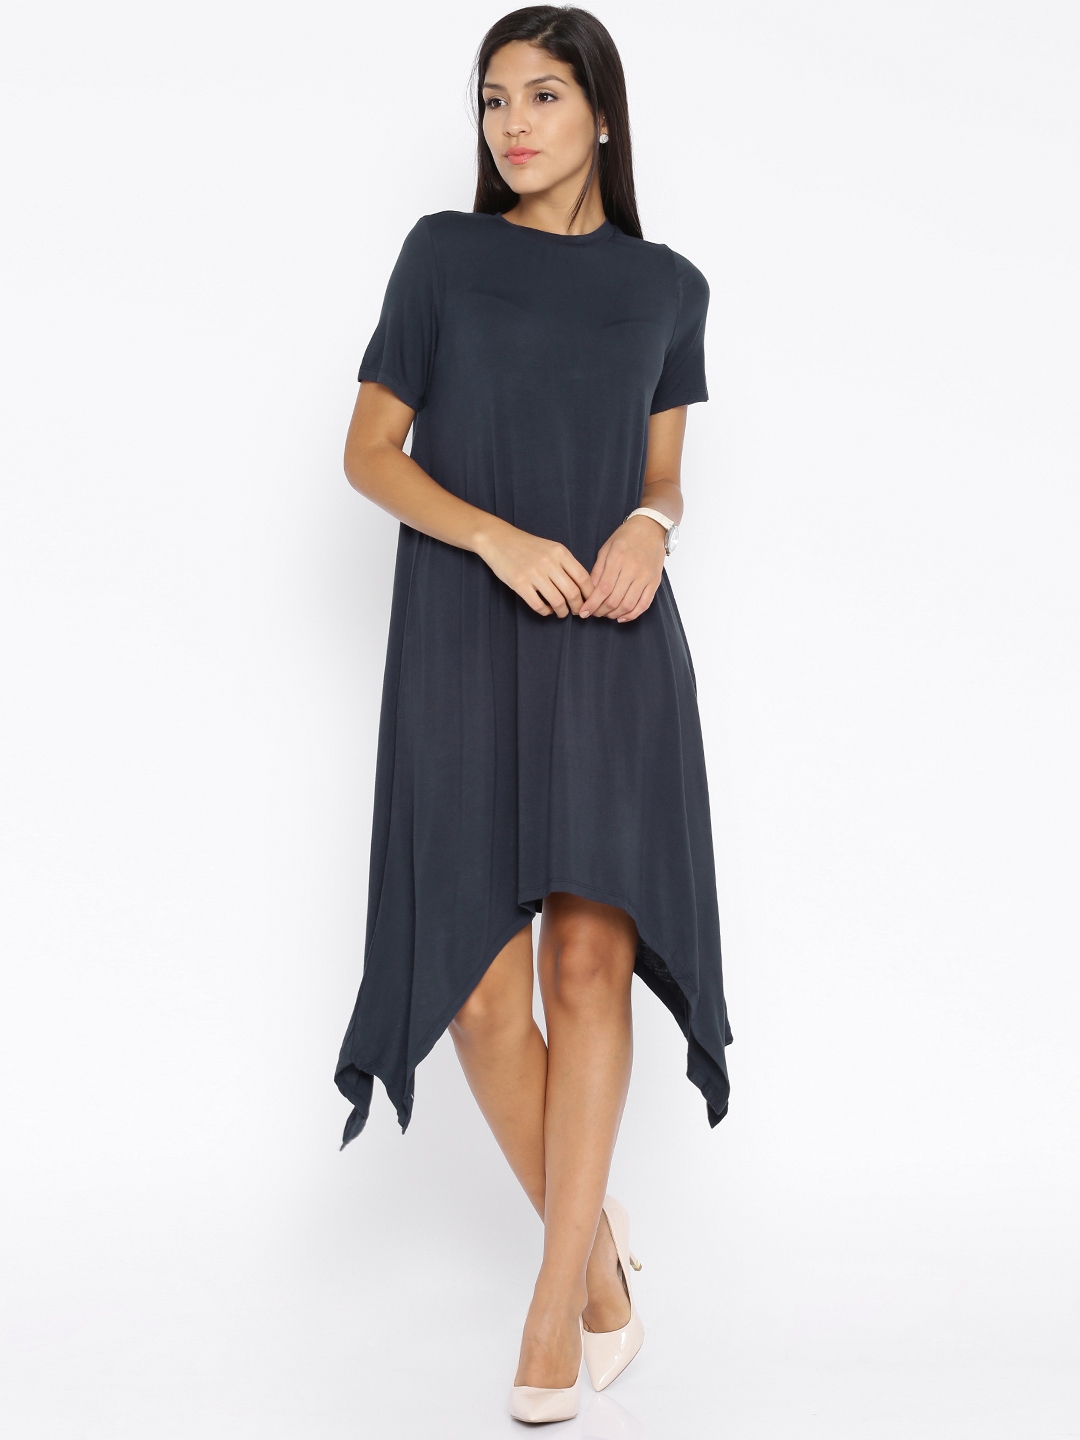 Buy ONLY Navy Jersey Dress - Dresses for Women 1323805 | Myntra